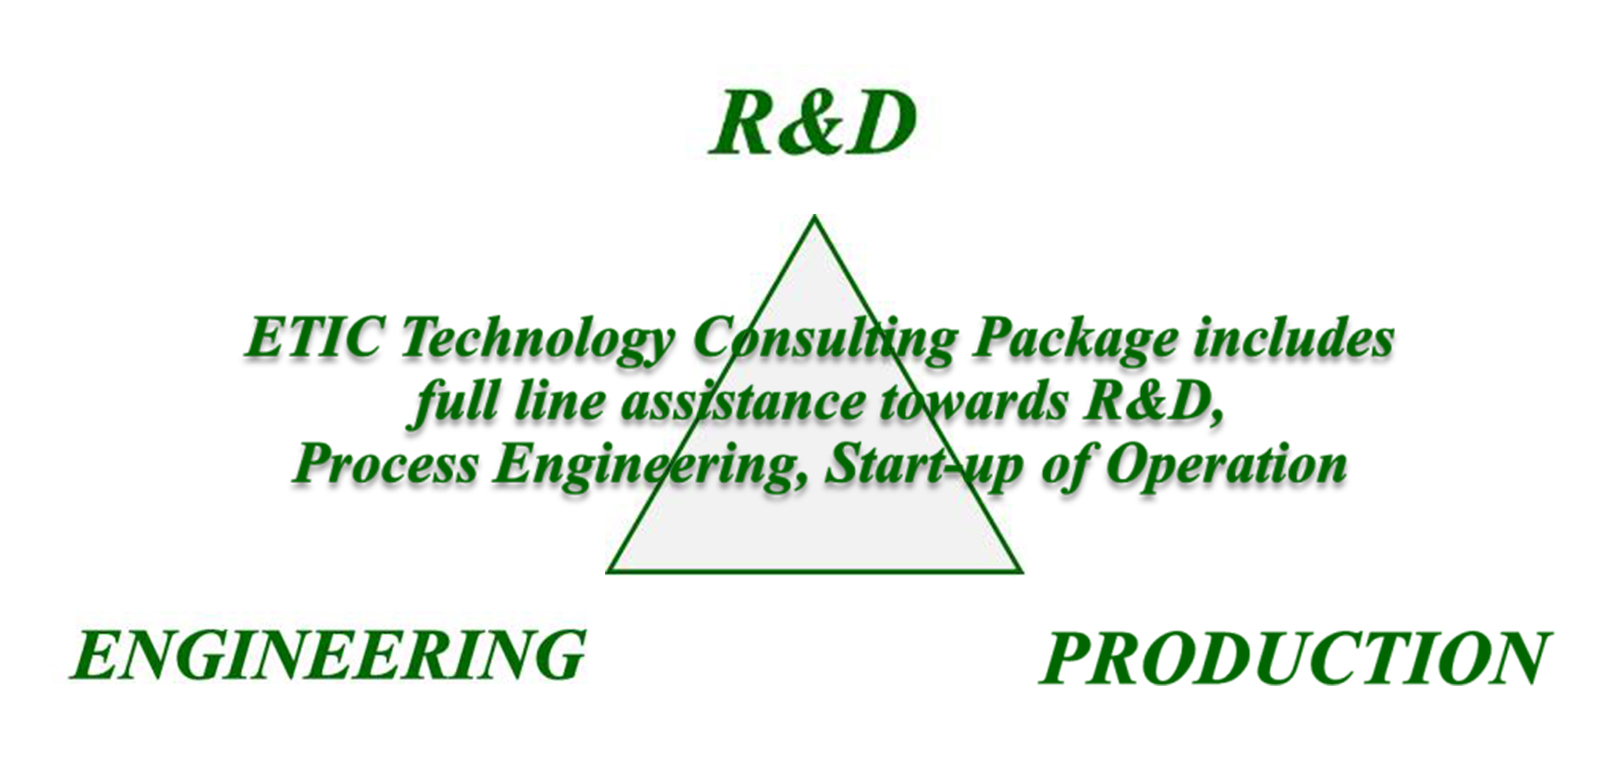 ETIC Technology Consulting Package includes full line assistance towards R&D, Process Engineering, Start-up of Operation.